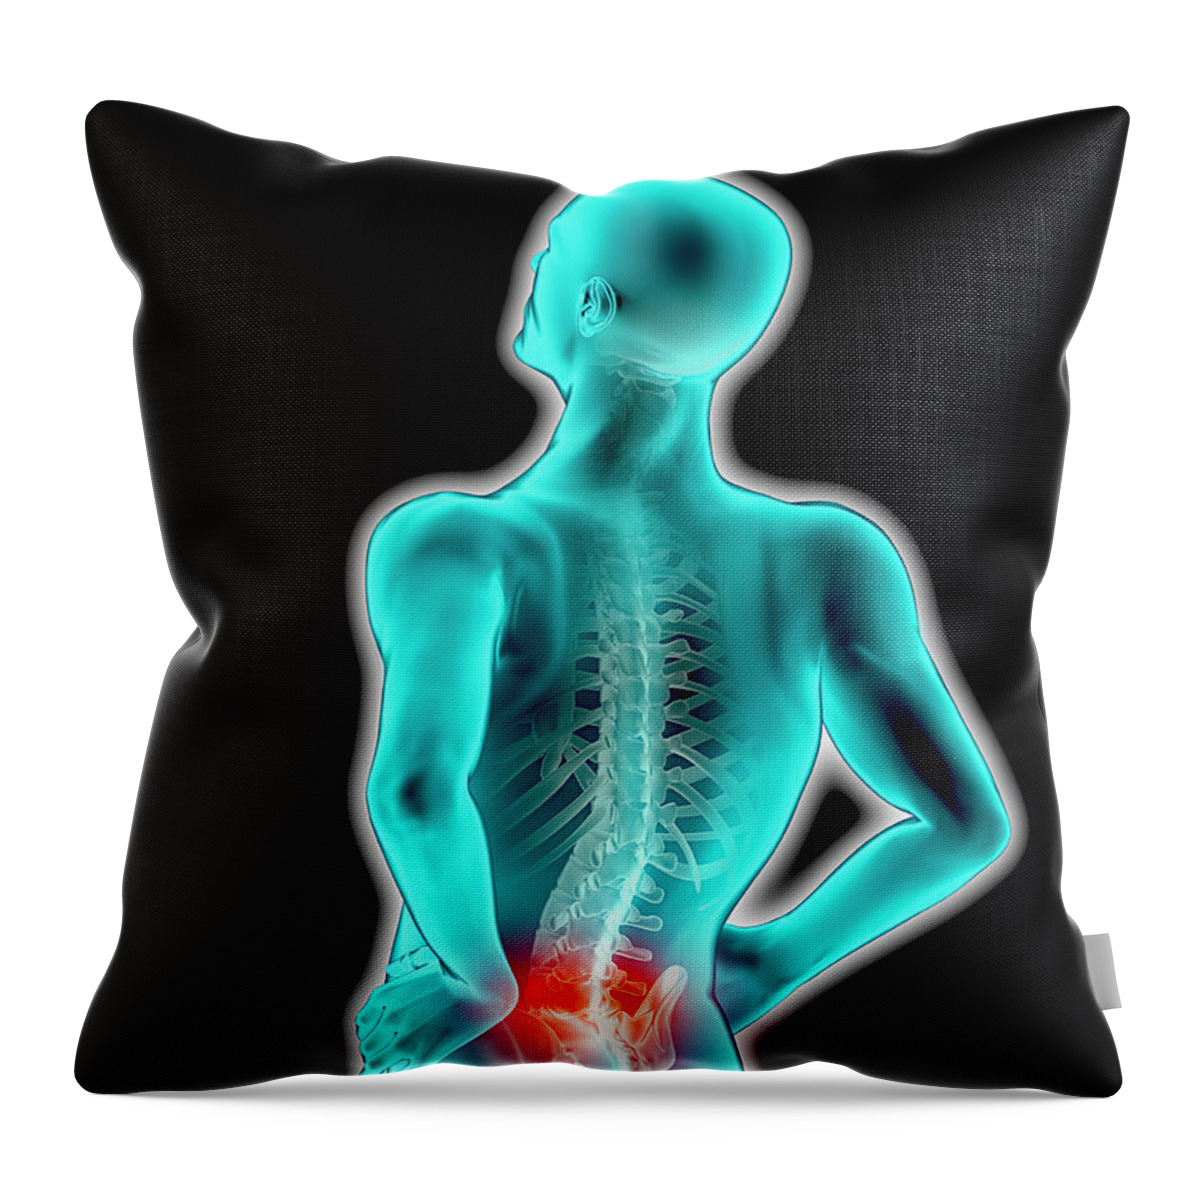 Problems Throw Pillow featuring the digital art Image Representing A Sore Back On Human by Doug Armand